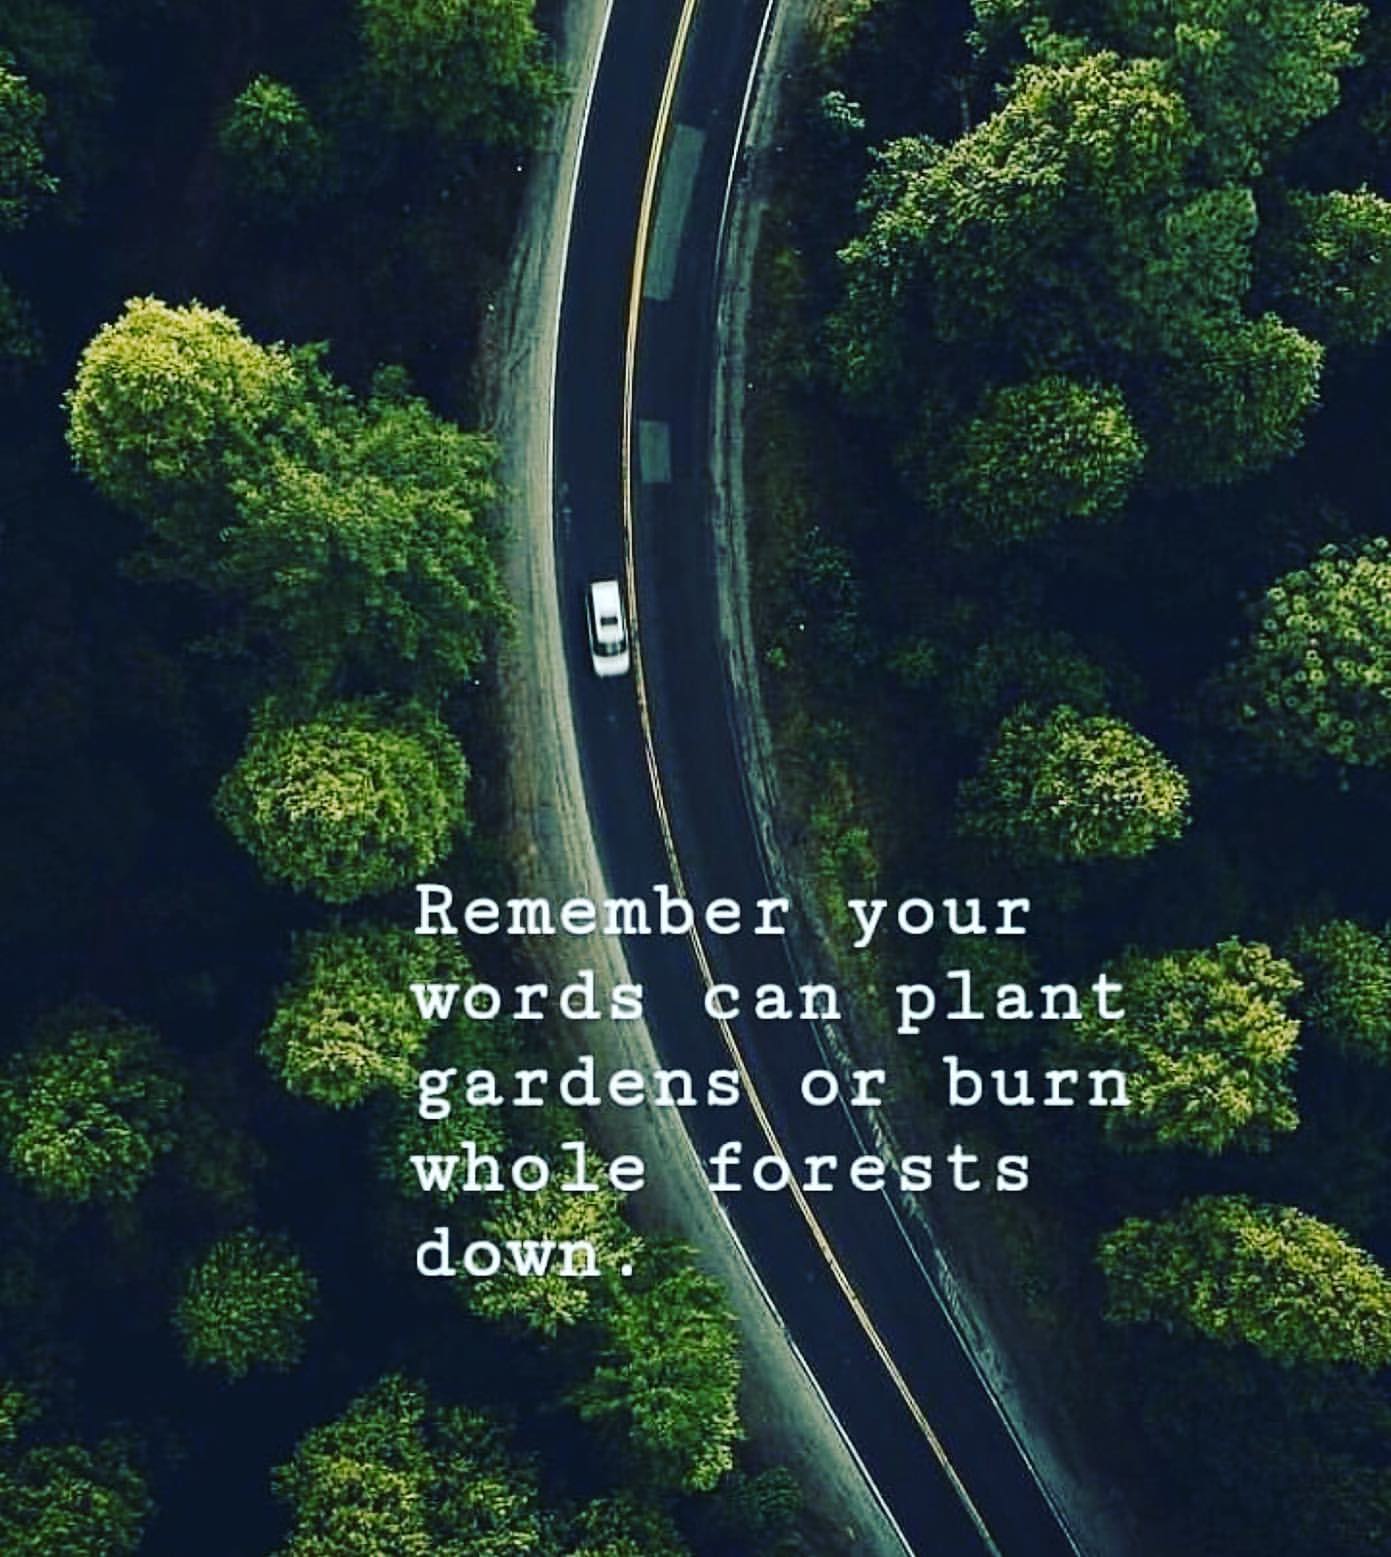 Remember your words can plant gardens or burn whole forests down.